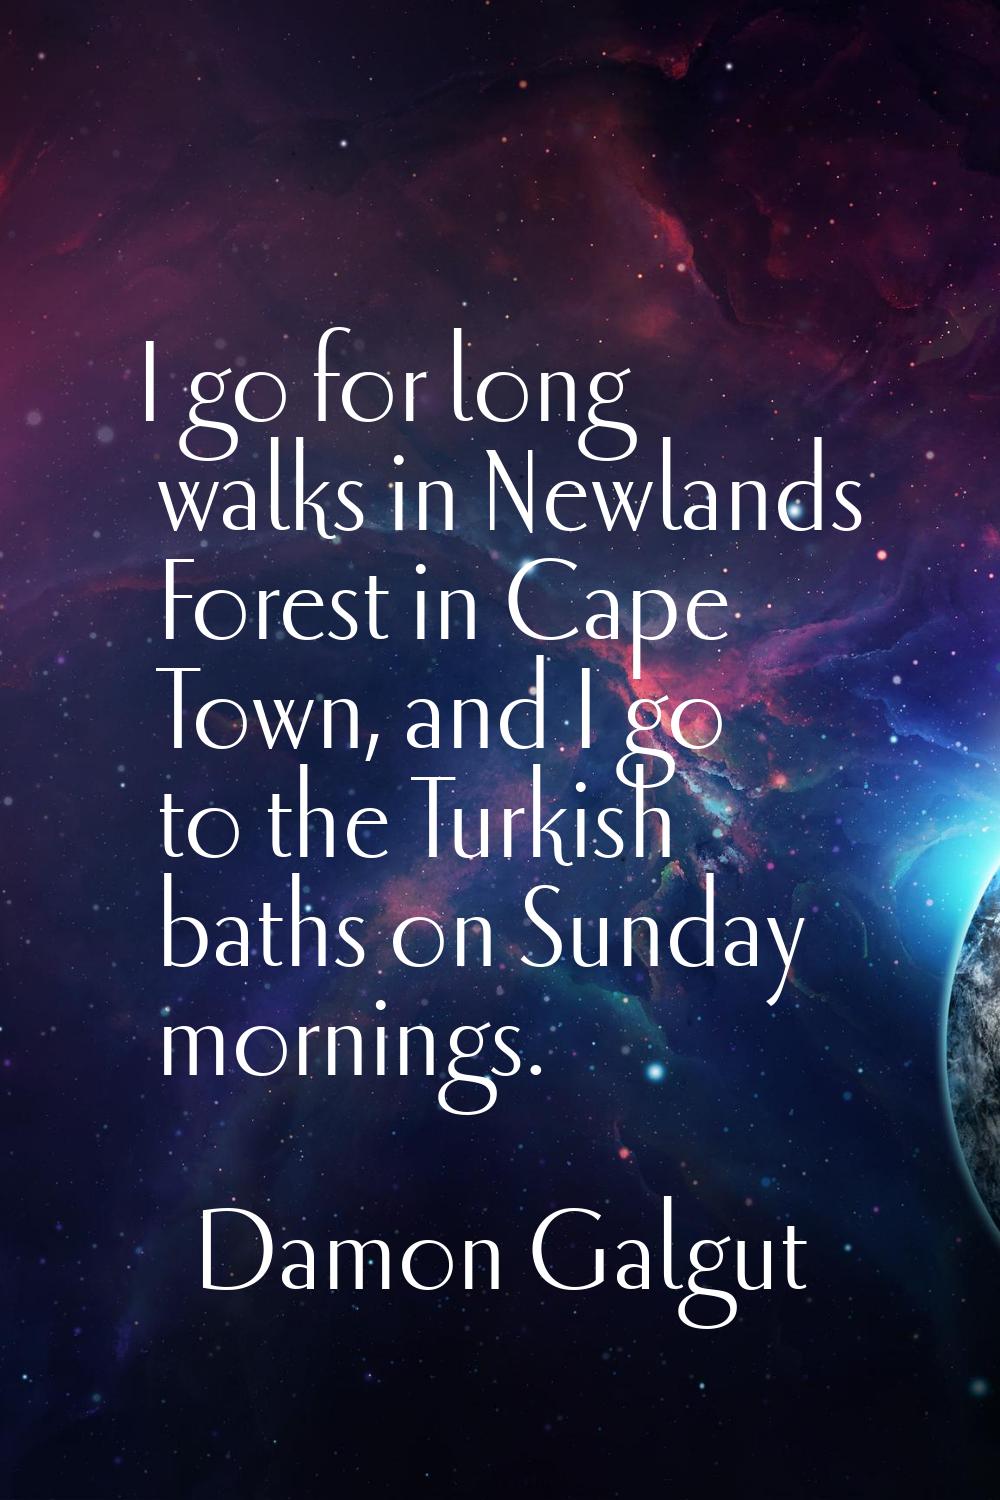 I go for long walks in Newlands Forest in Cape Town, and I go to the Turkish baths on Sunday mornin